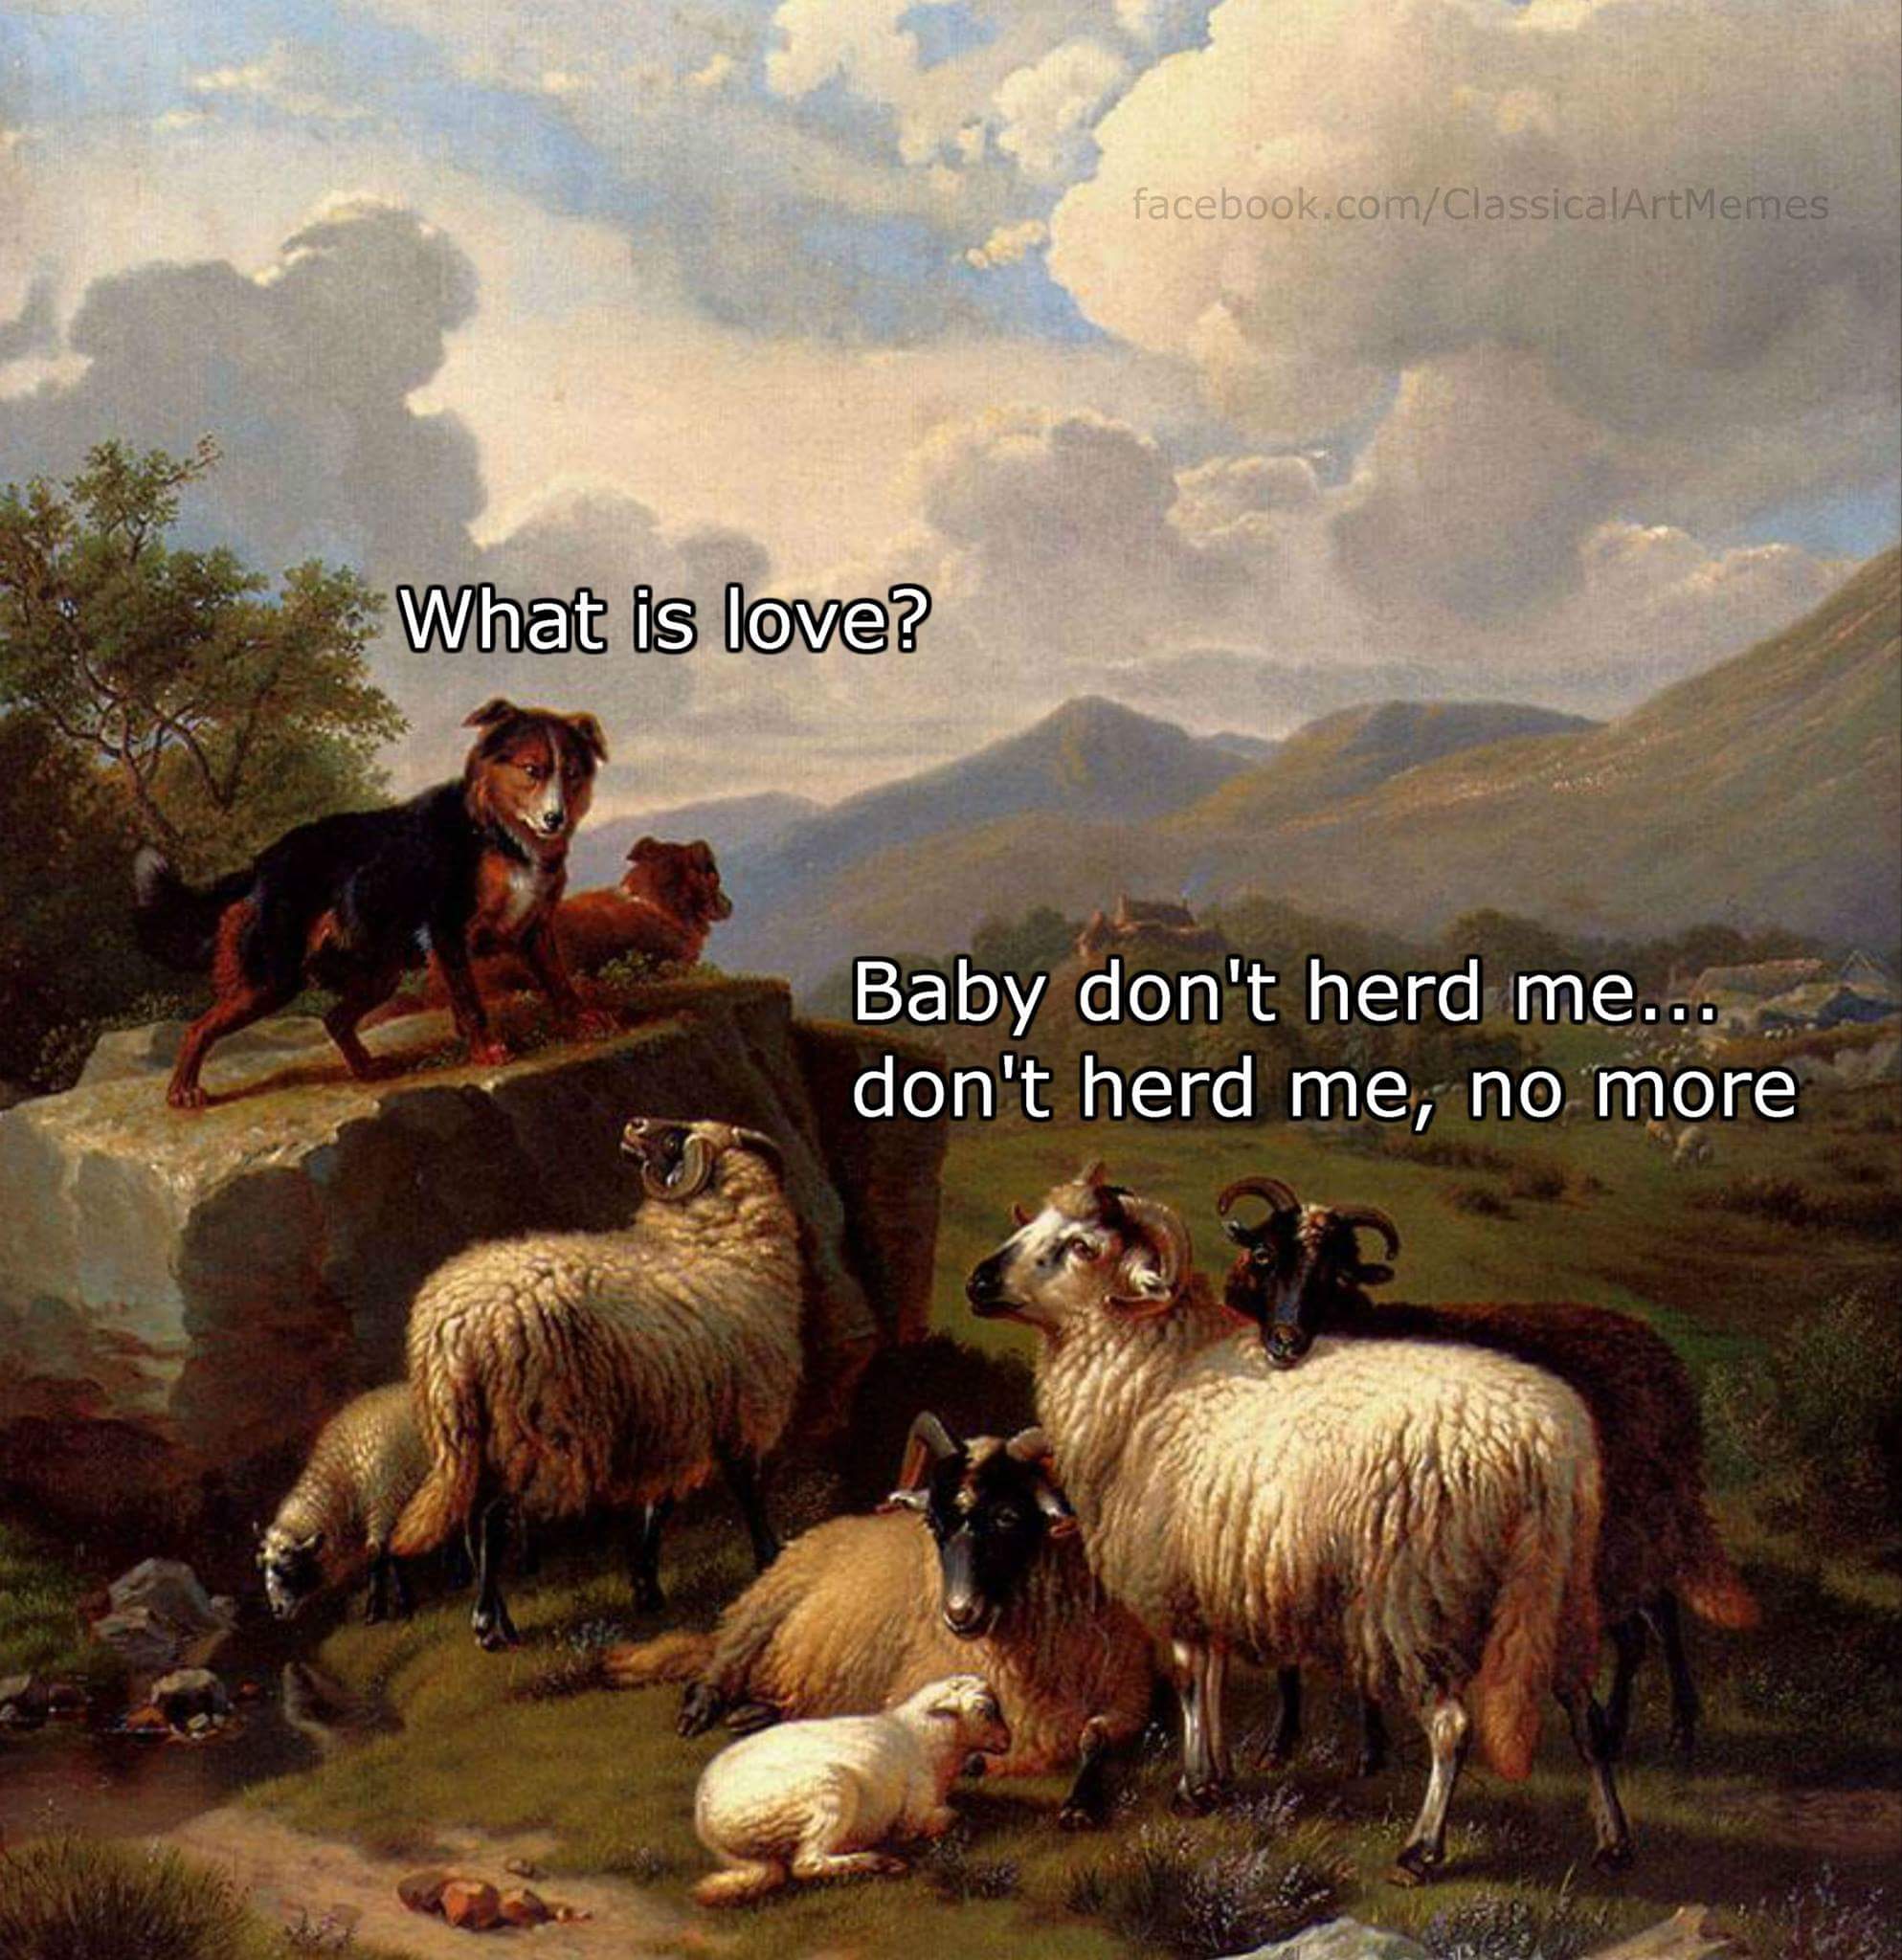 baby don t herd me sheep - facebook.comClassicalArtMemes What is love? Baby don't herd me... don't herd me, no more